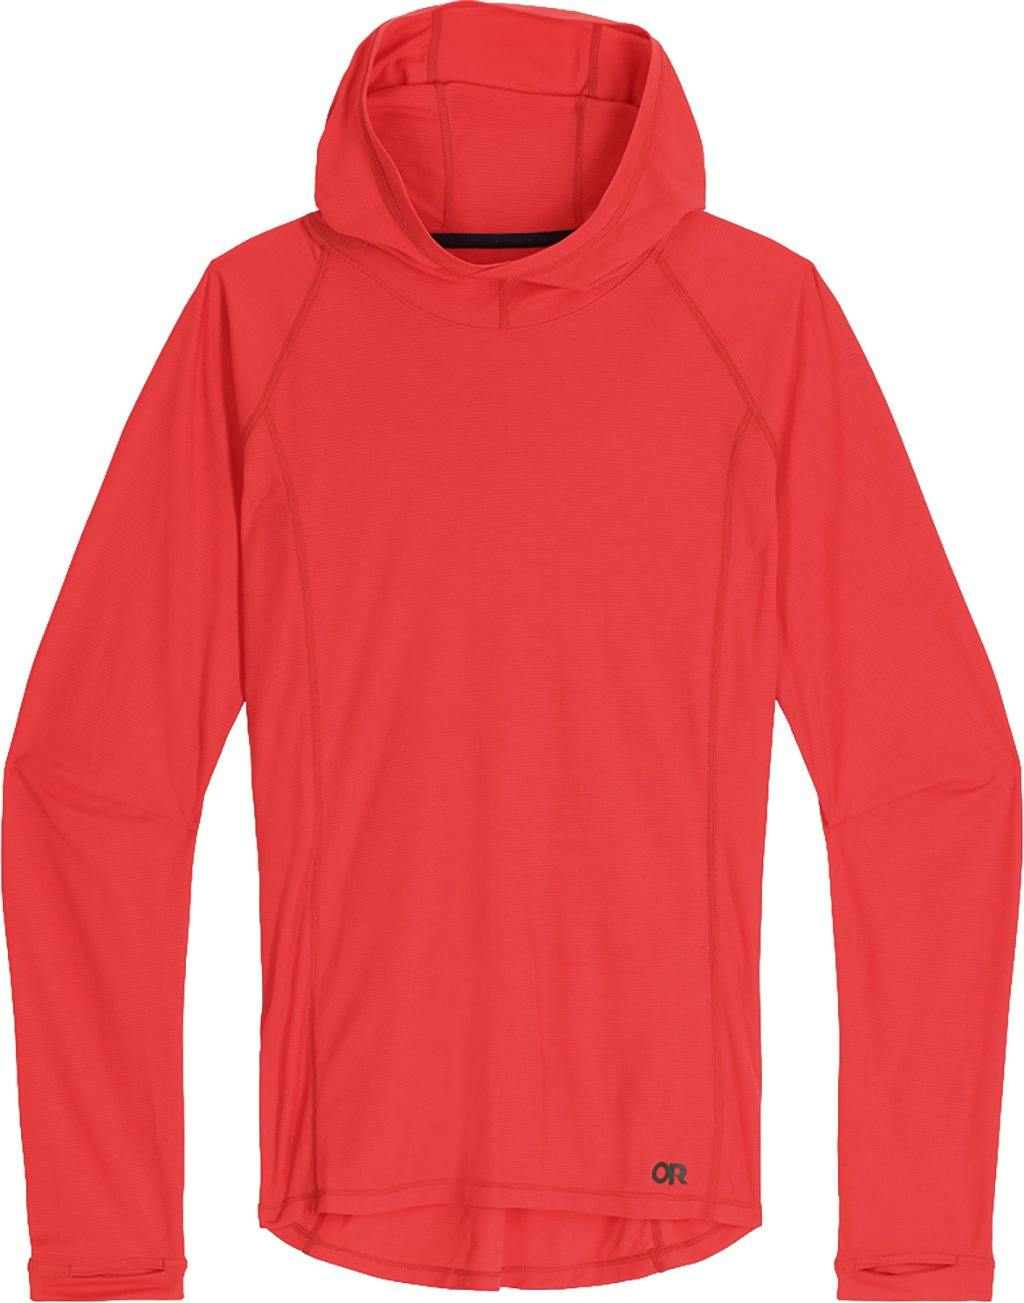 Product image for Echo Hoodie - Women's